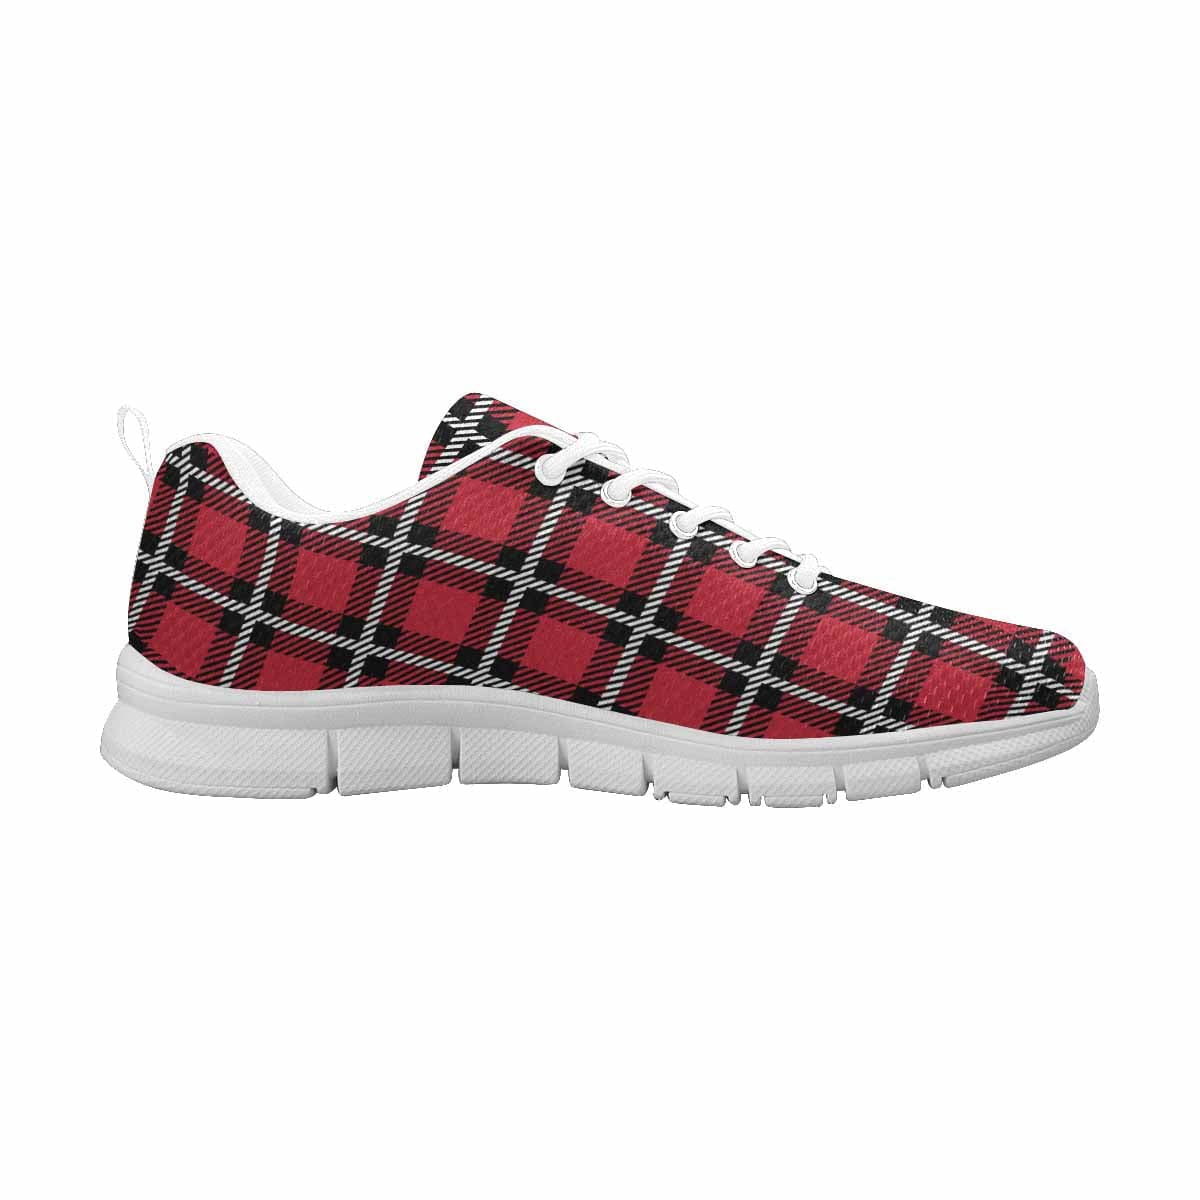 Sneakers For Men Buffalo Plaid Red And White - Running Shoes Dg867 - Mens |